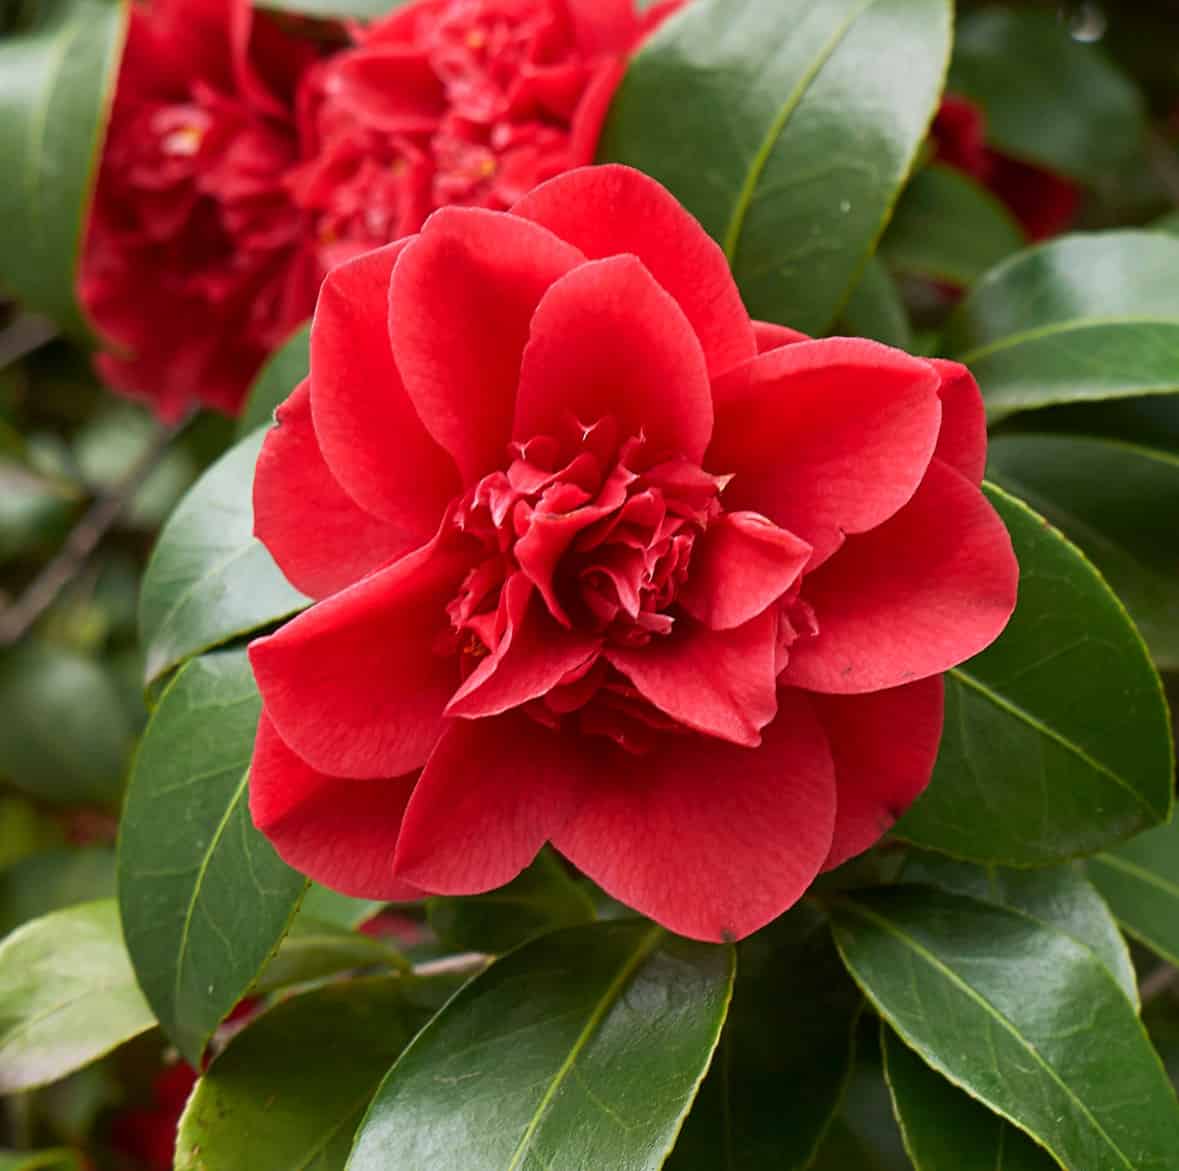 the Japanese camellia is an evergreen that comes in a variety of different color blooms